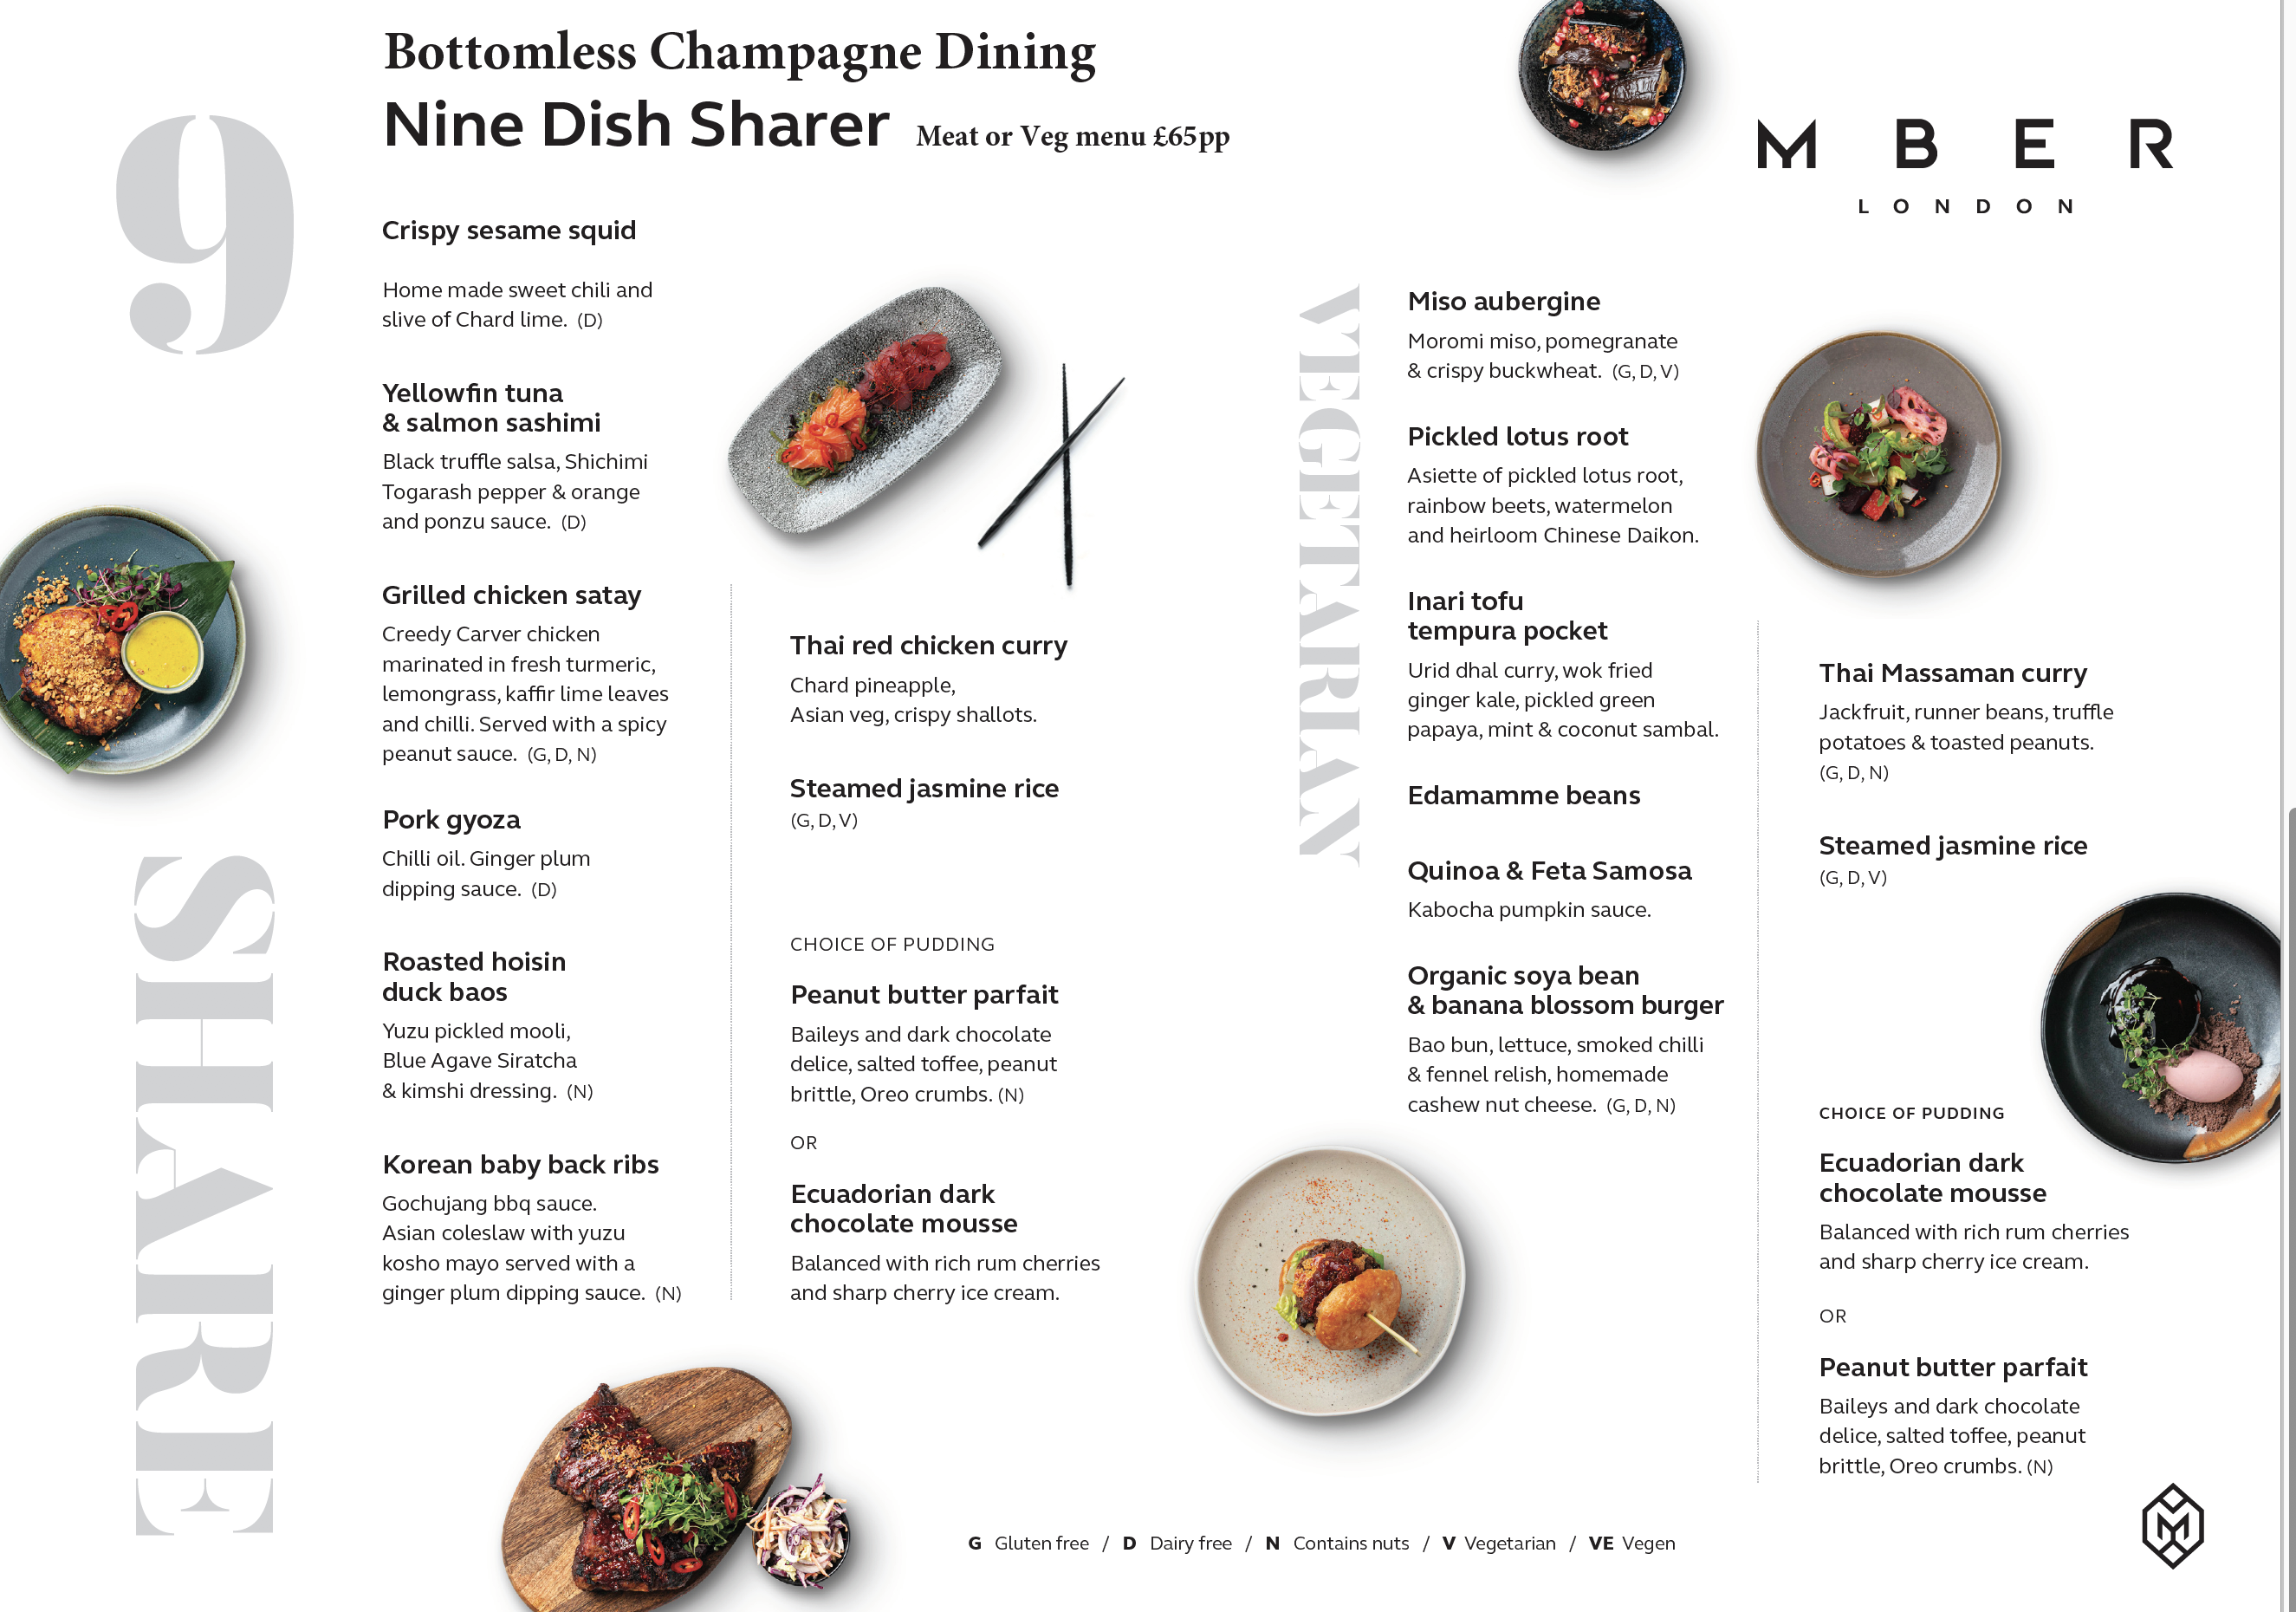 Bottomless Champagne Dining £65pp